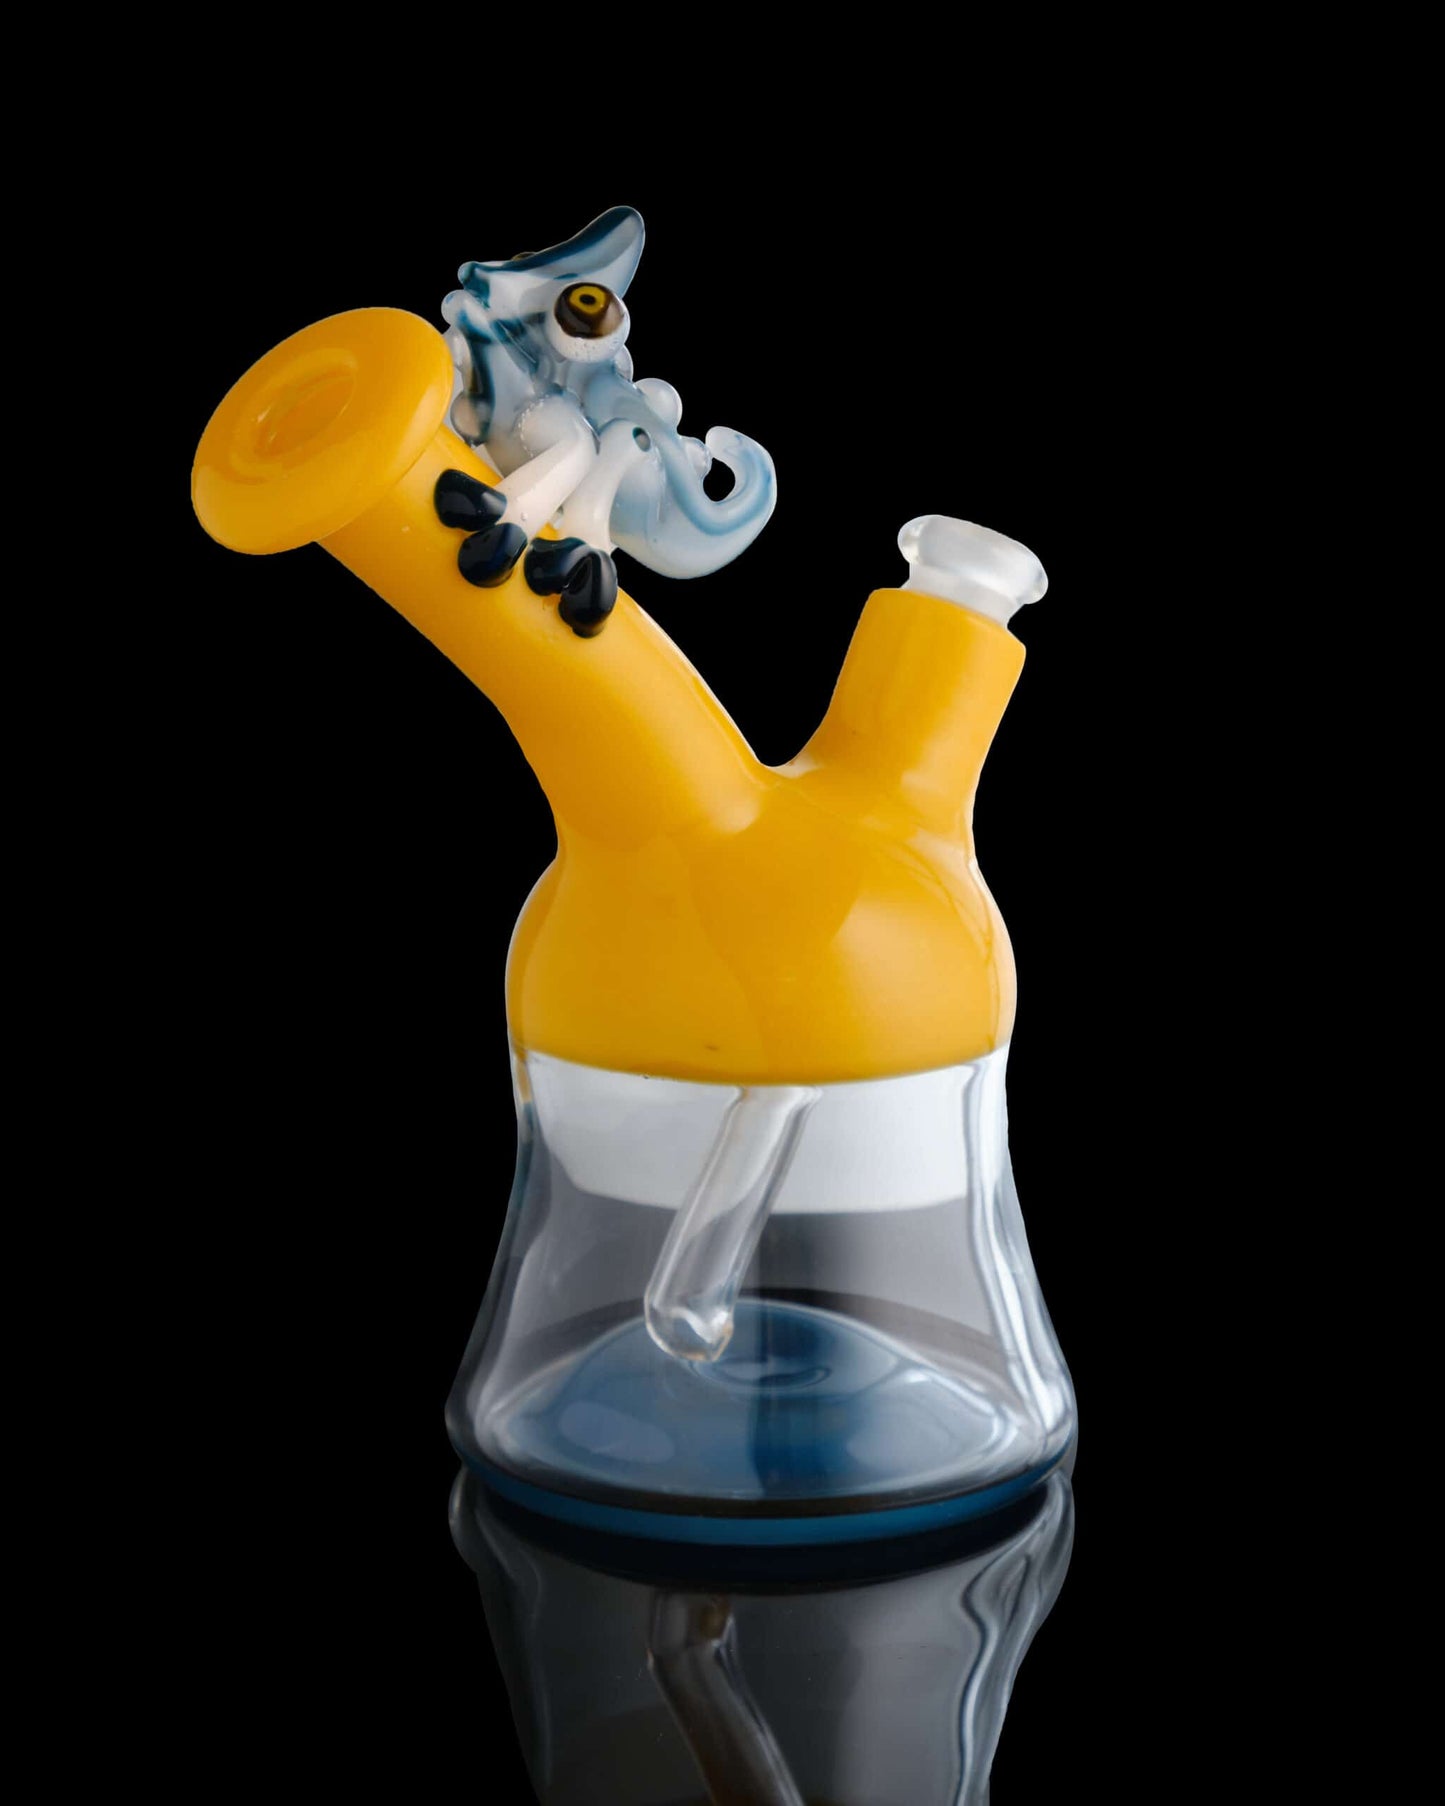 heady design of the Amber Purple Chameleon on Yellow/Blue Rig by Willy That Glass Guy